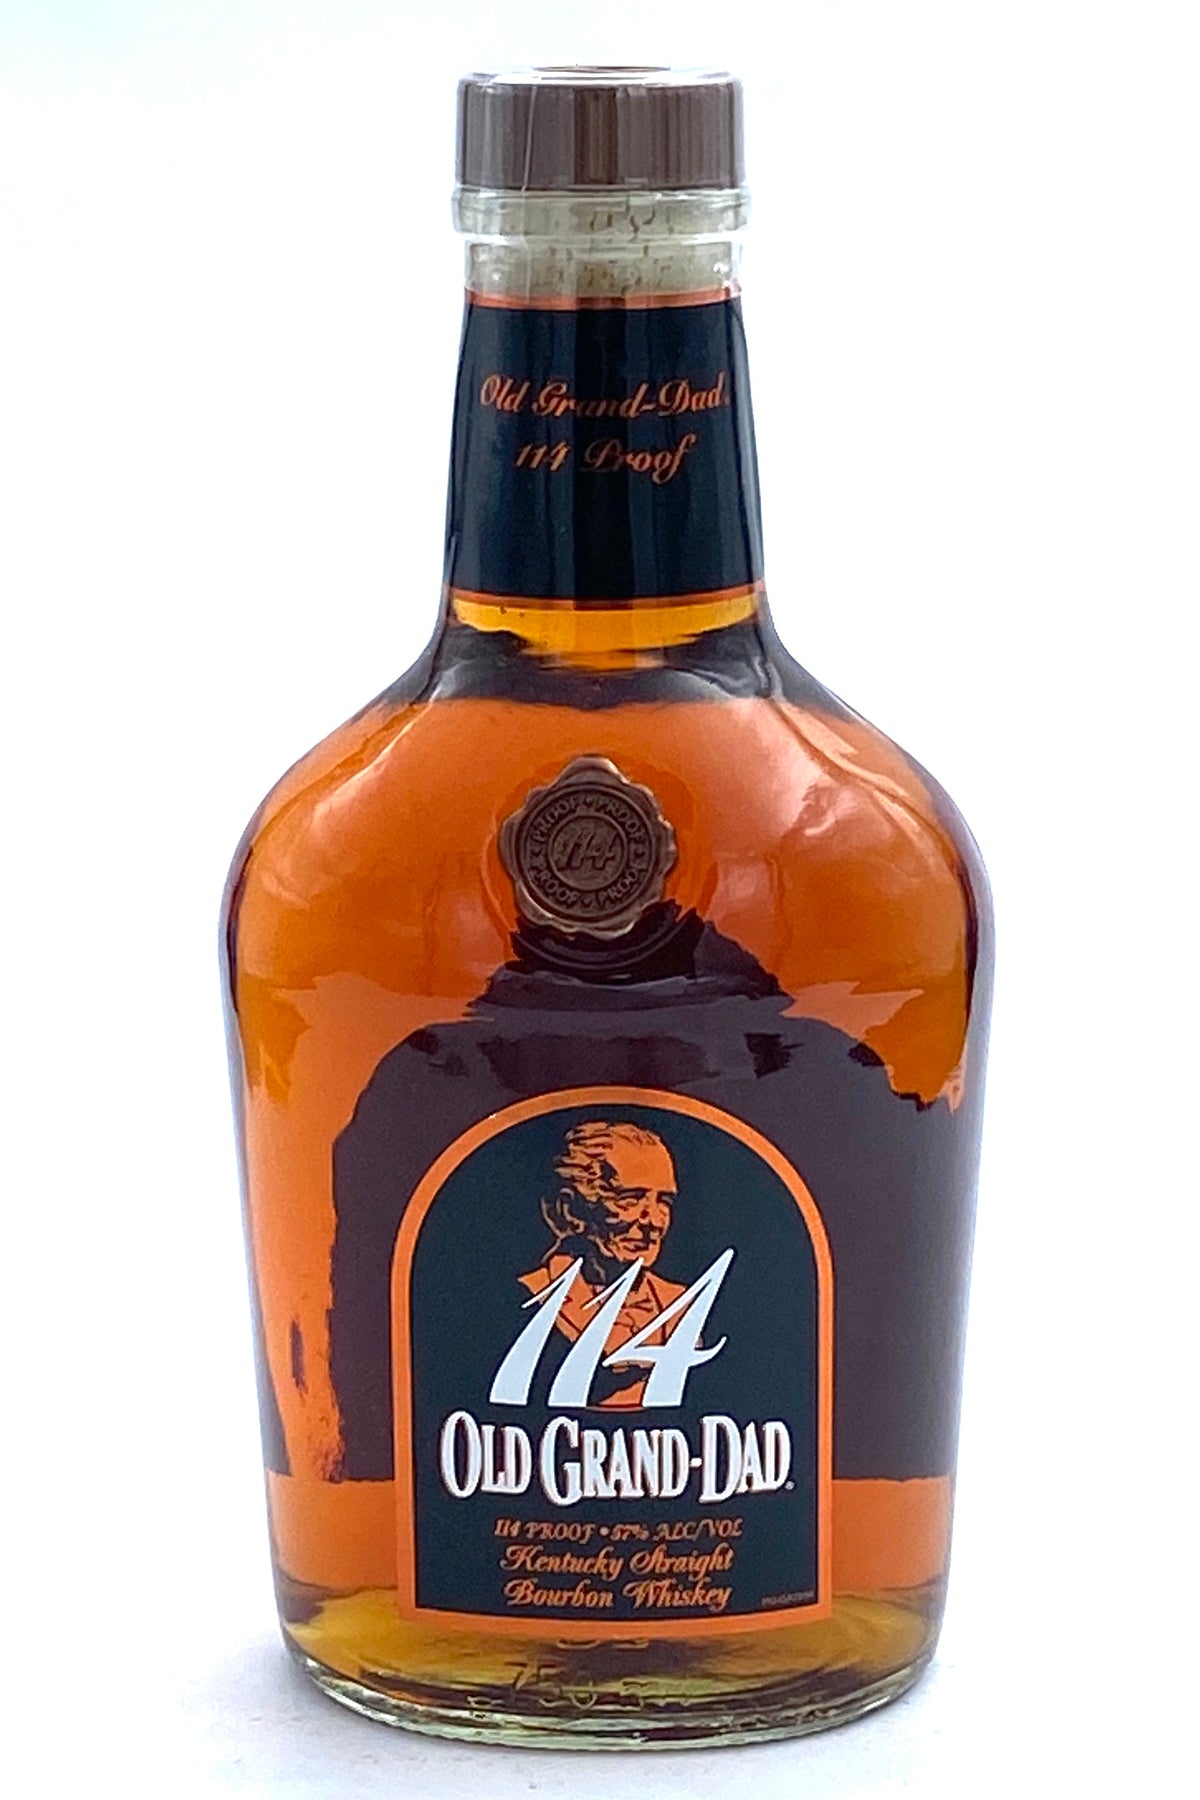 Old Grand-Dad 114 Proof Bourbon Whiskey